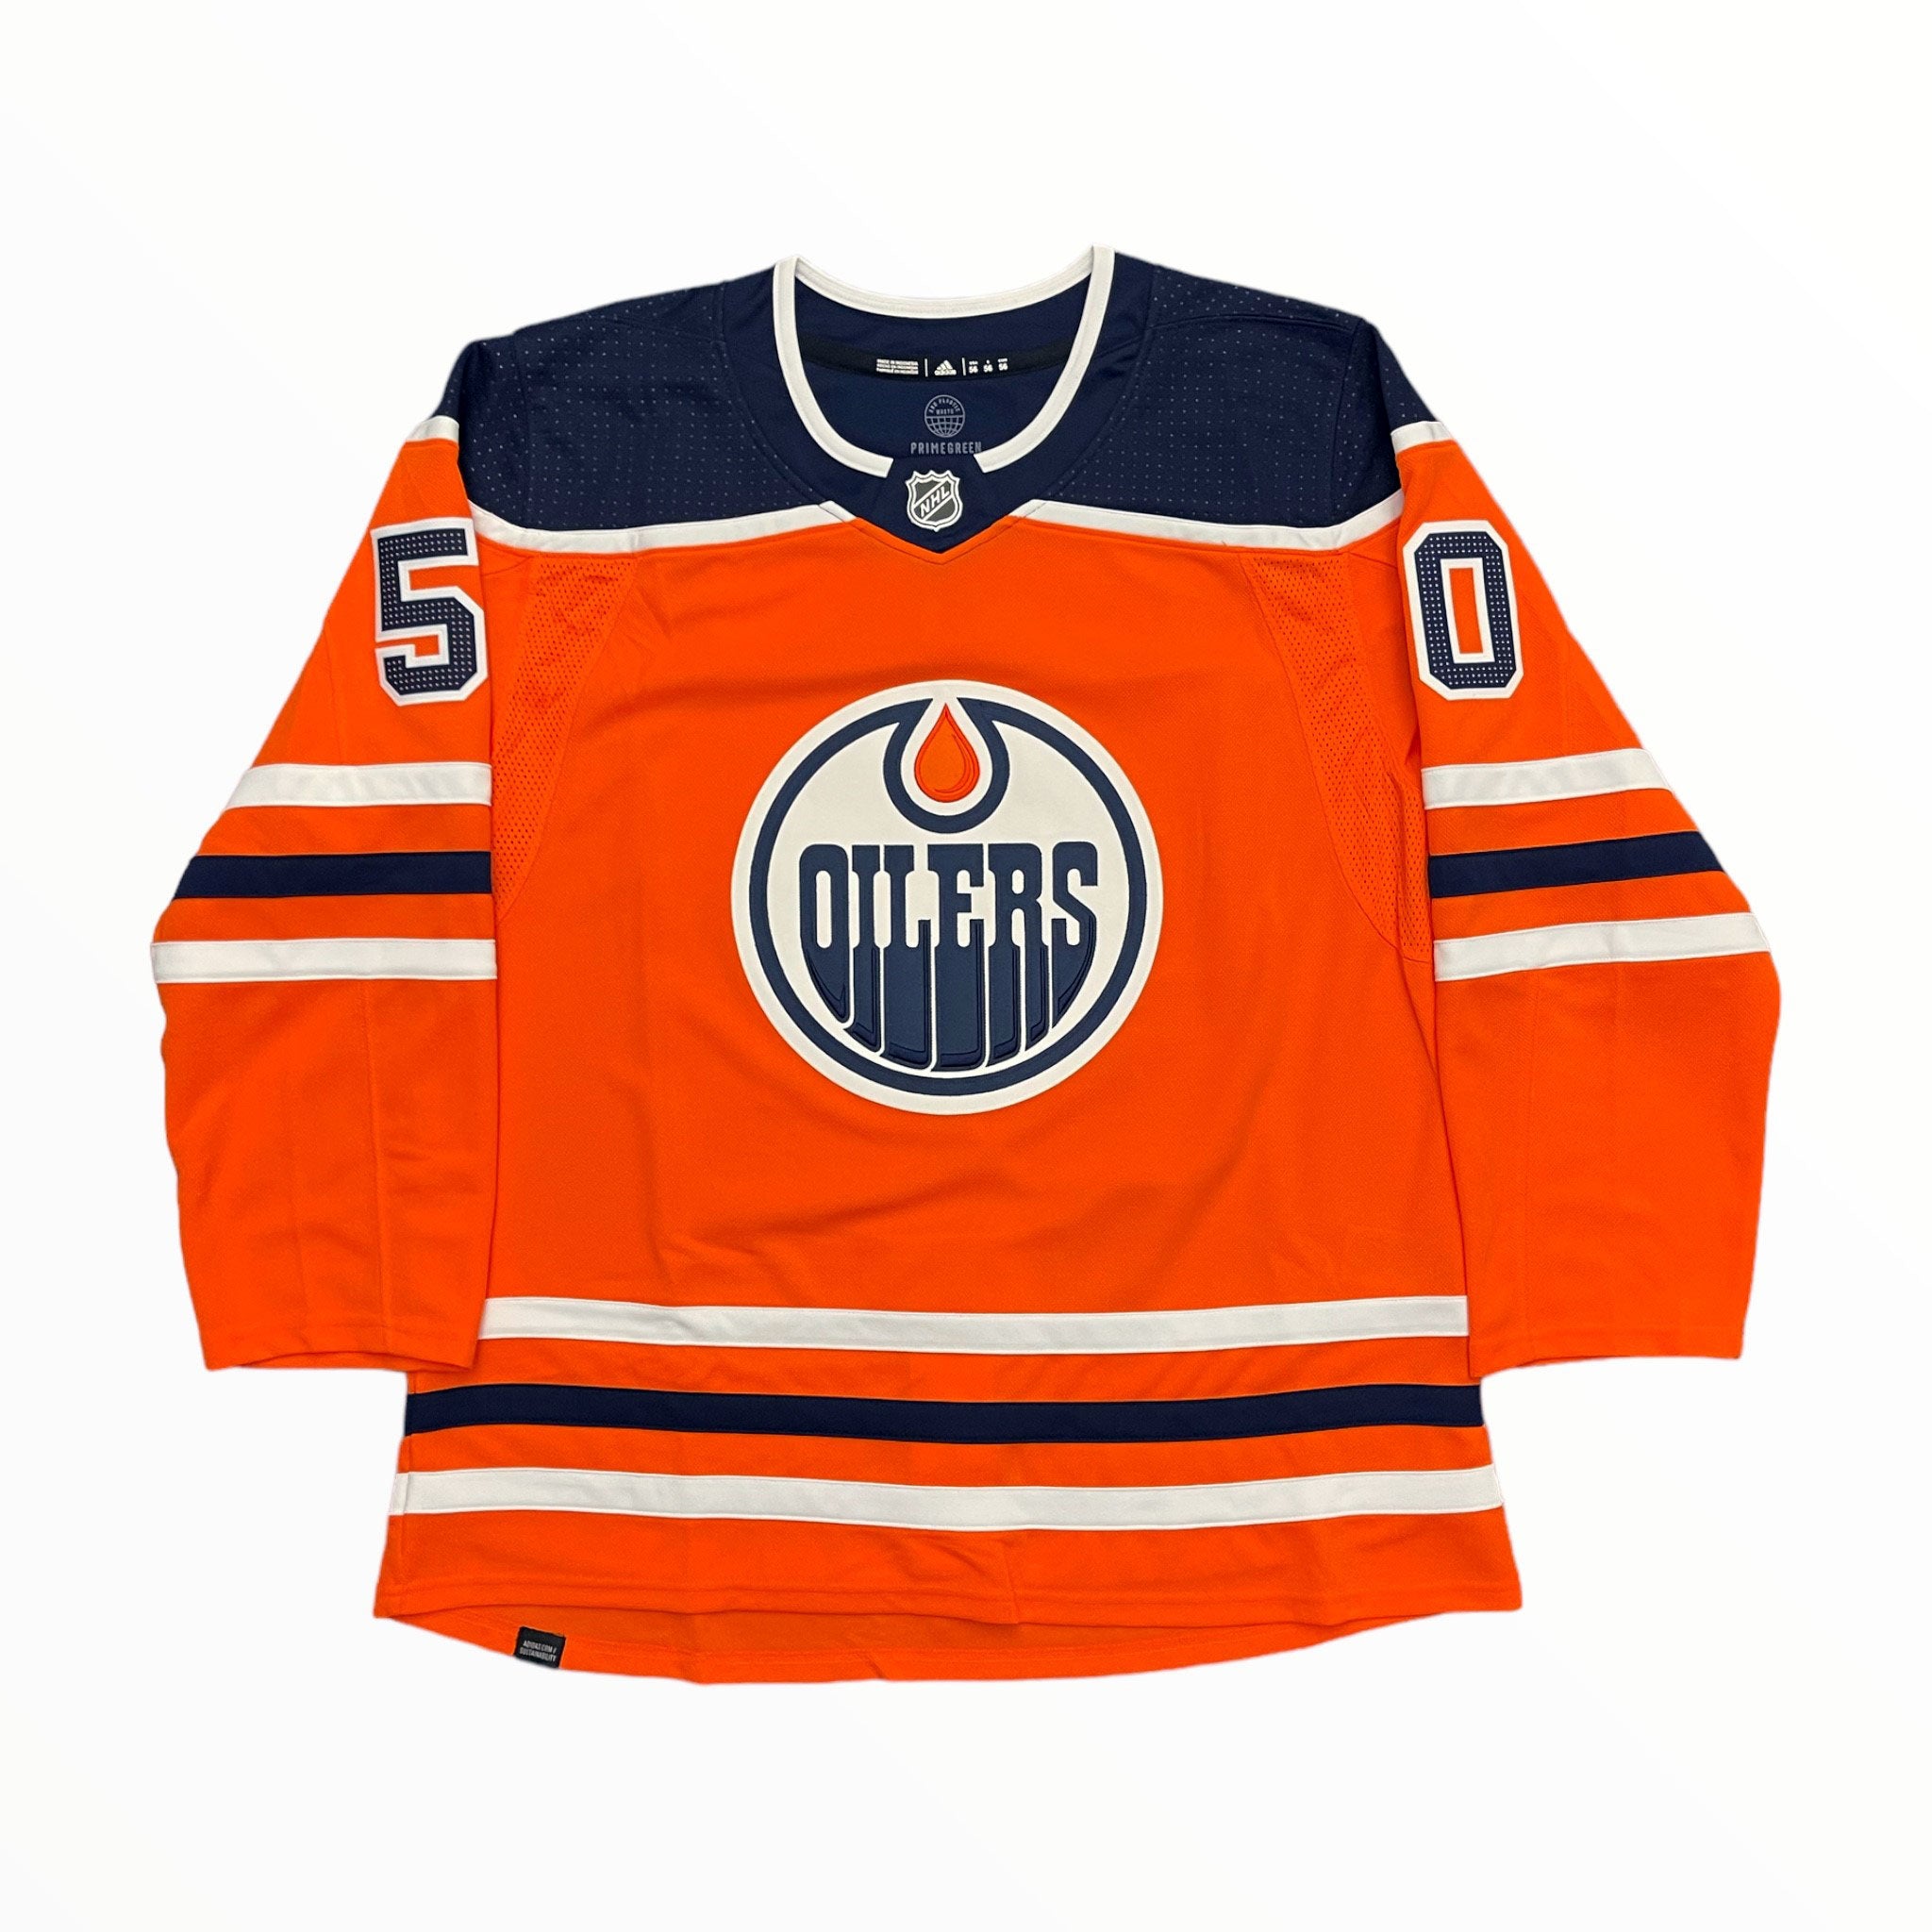 Edmonton Oilers adidas Vintage Pro Jersey (Home) - NHL Unsigned